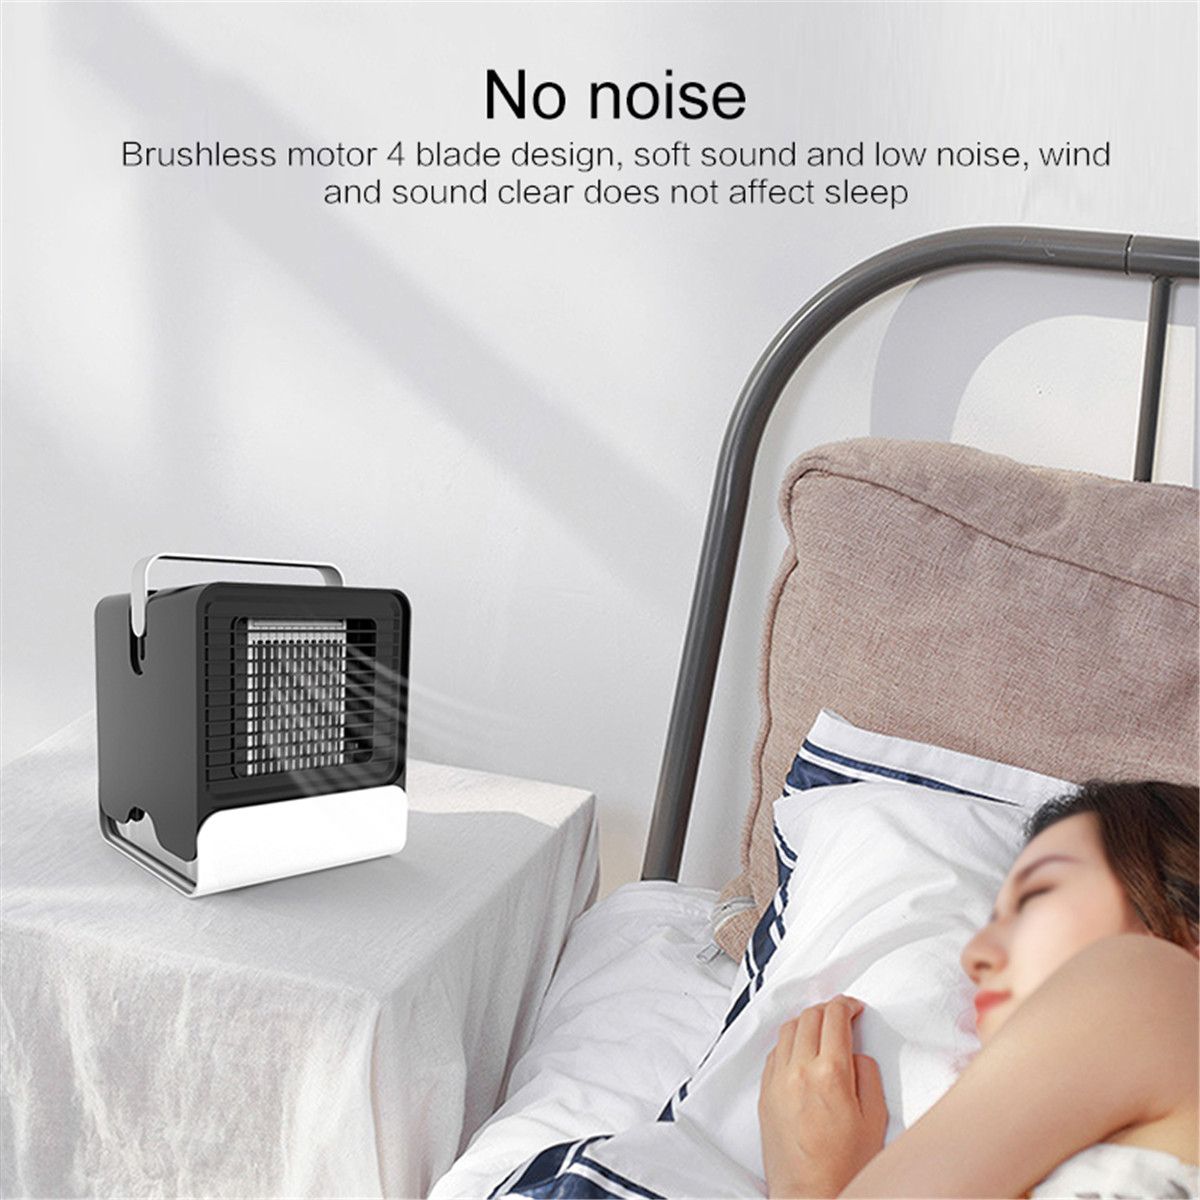 Mini-Portable-Air-Conditioner-Night-Light-Conditioning-Cooler-Humidifier-Purifier-USB-Desktop-Air-Co-1710195